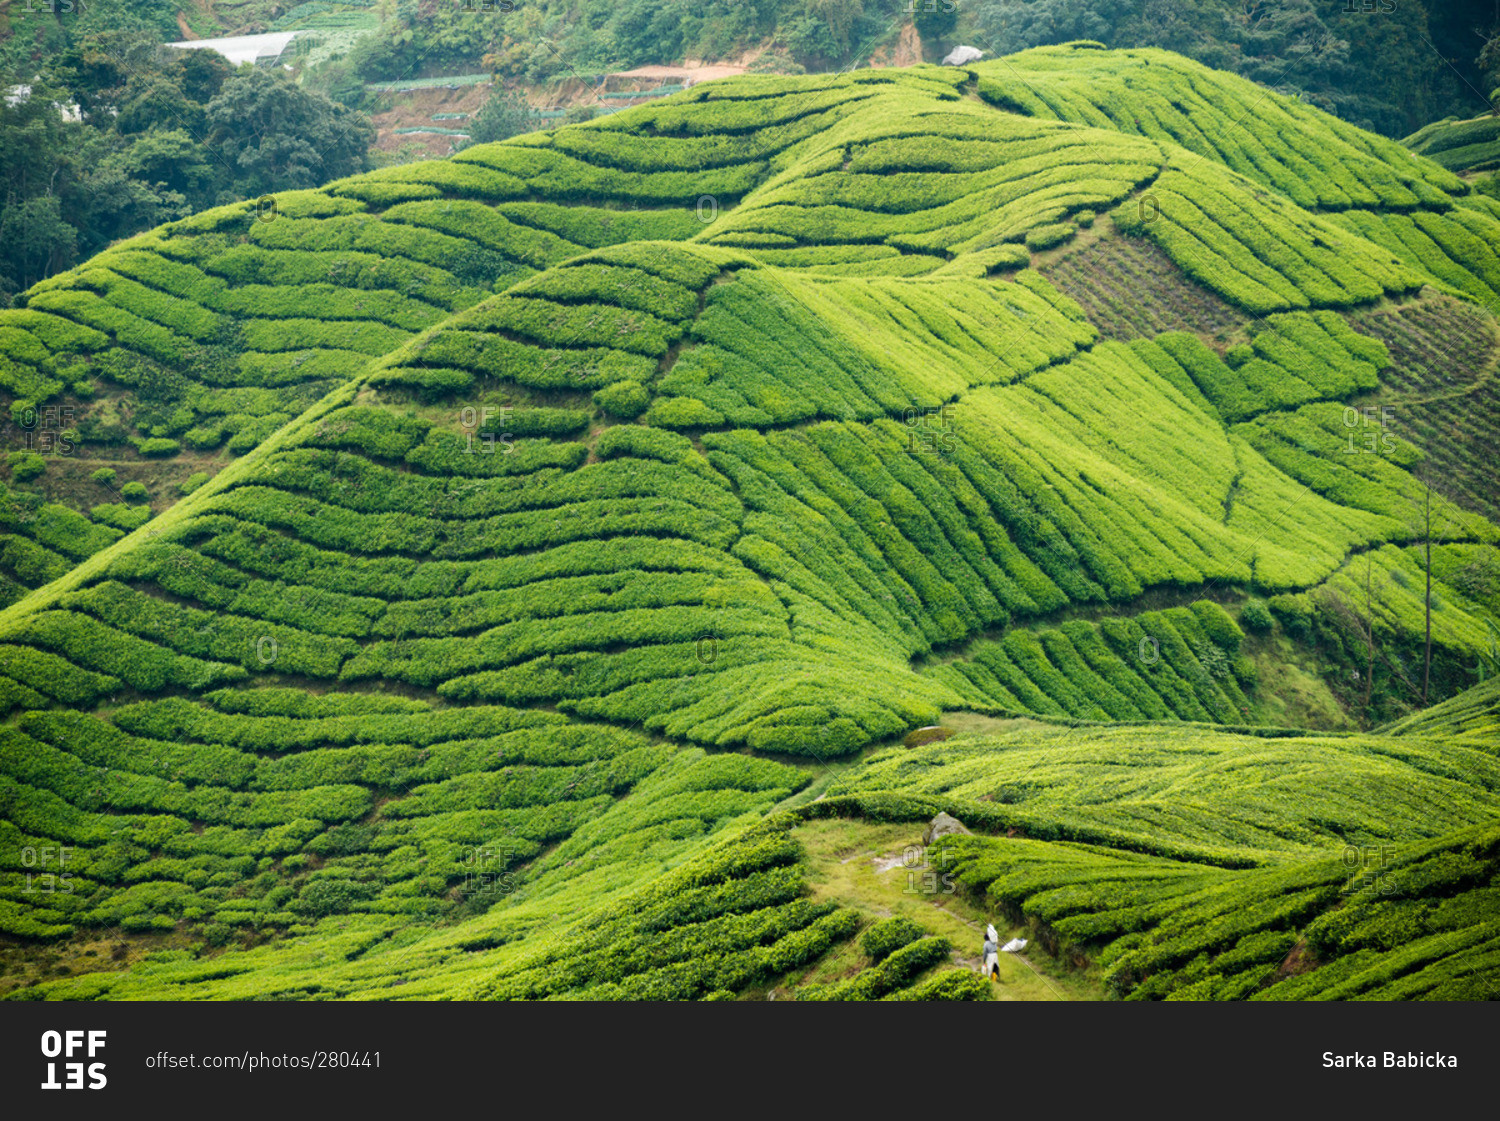 Worker on a tea plantation in the Cameron Highlands of Malaysia